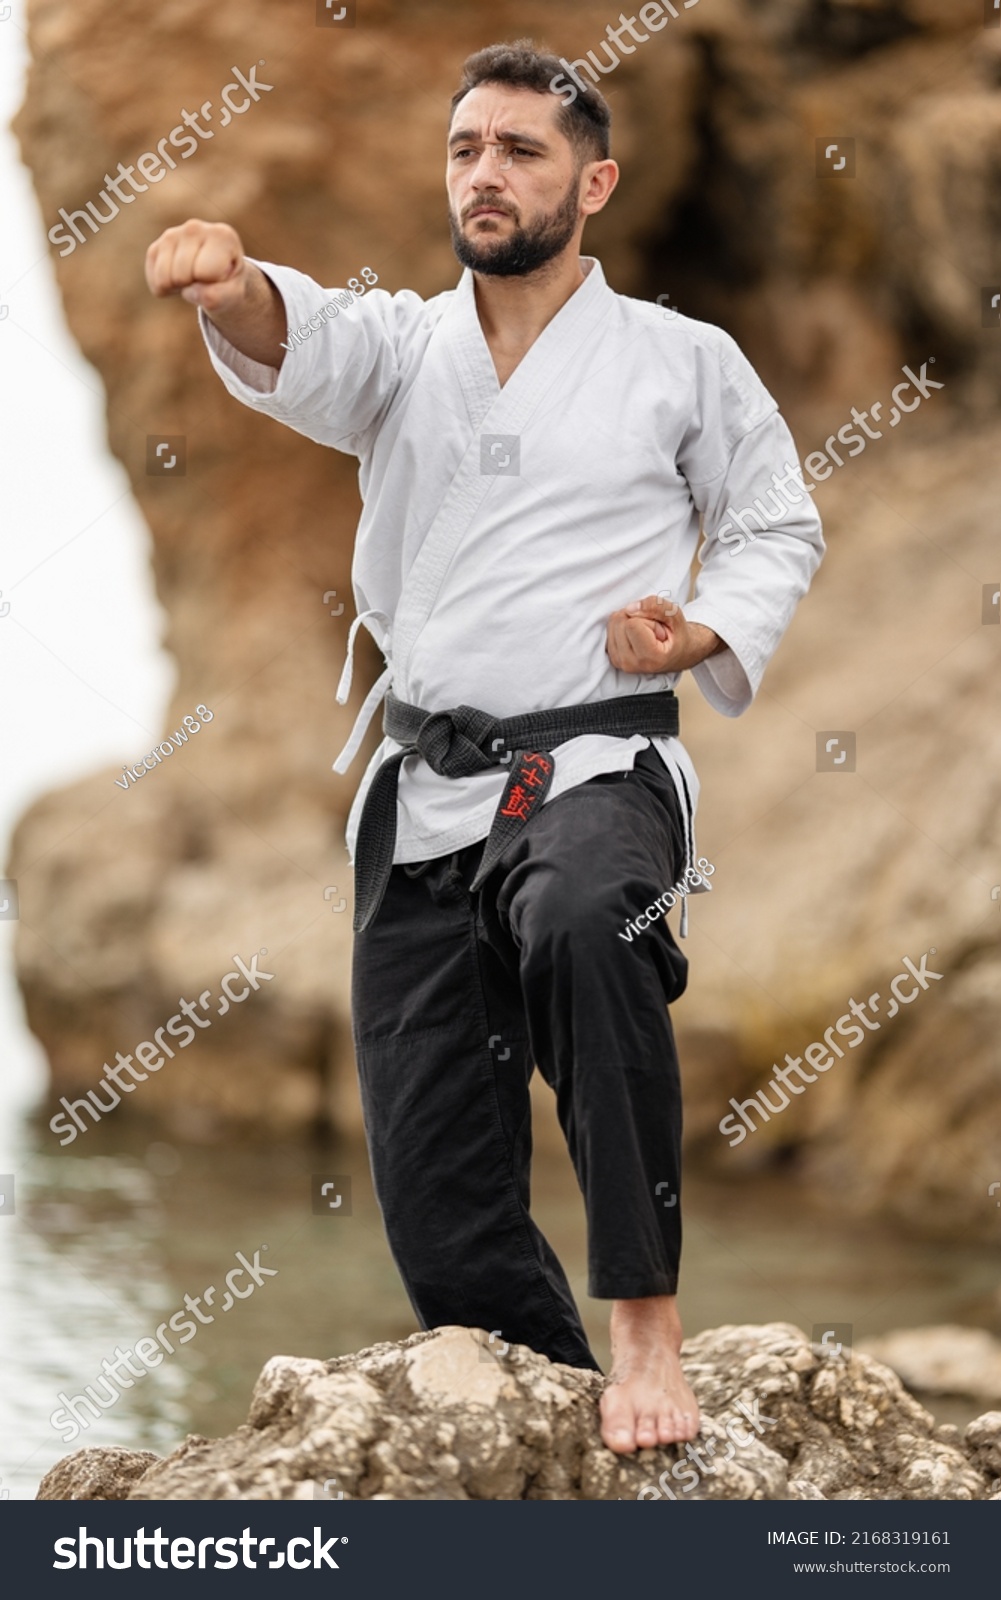 Karate master in kimono on a rock throwing a punch with a black belt with the Japanese word "Bushido" written on it. #2168319161